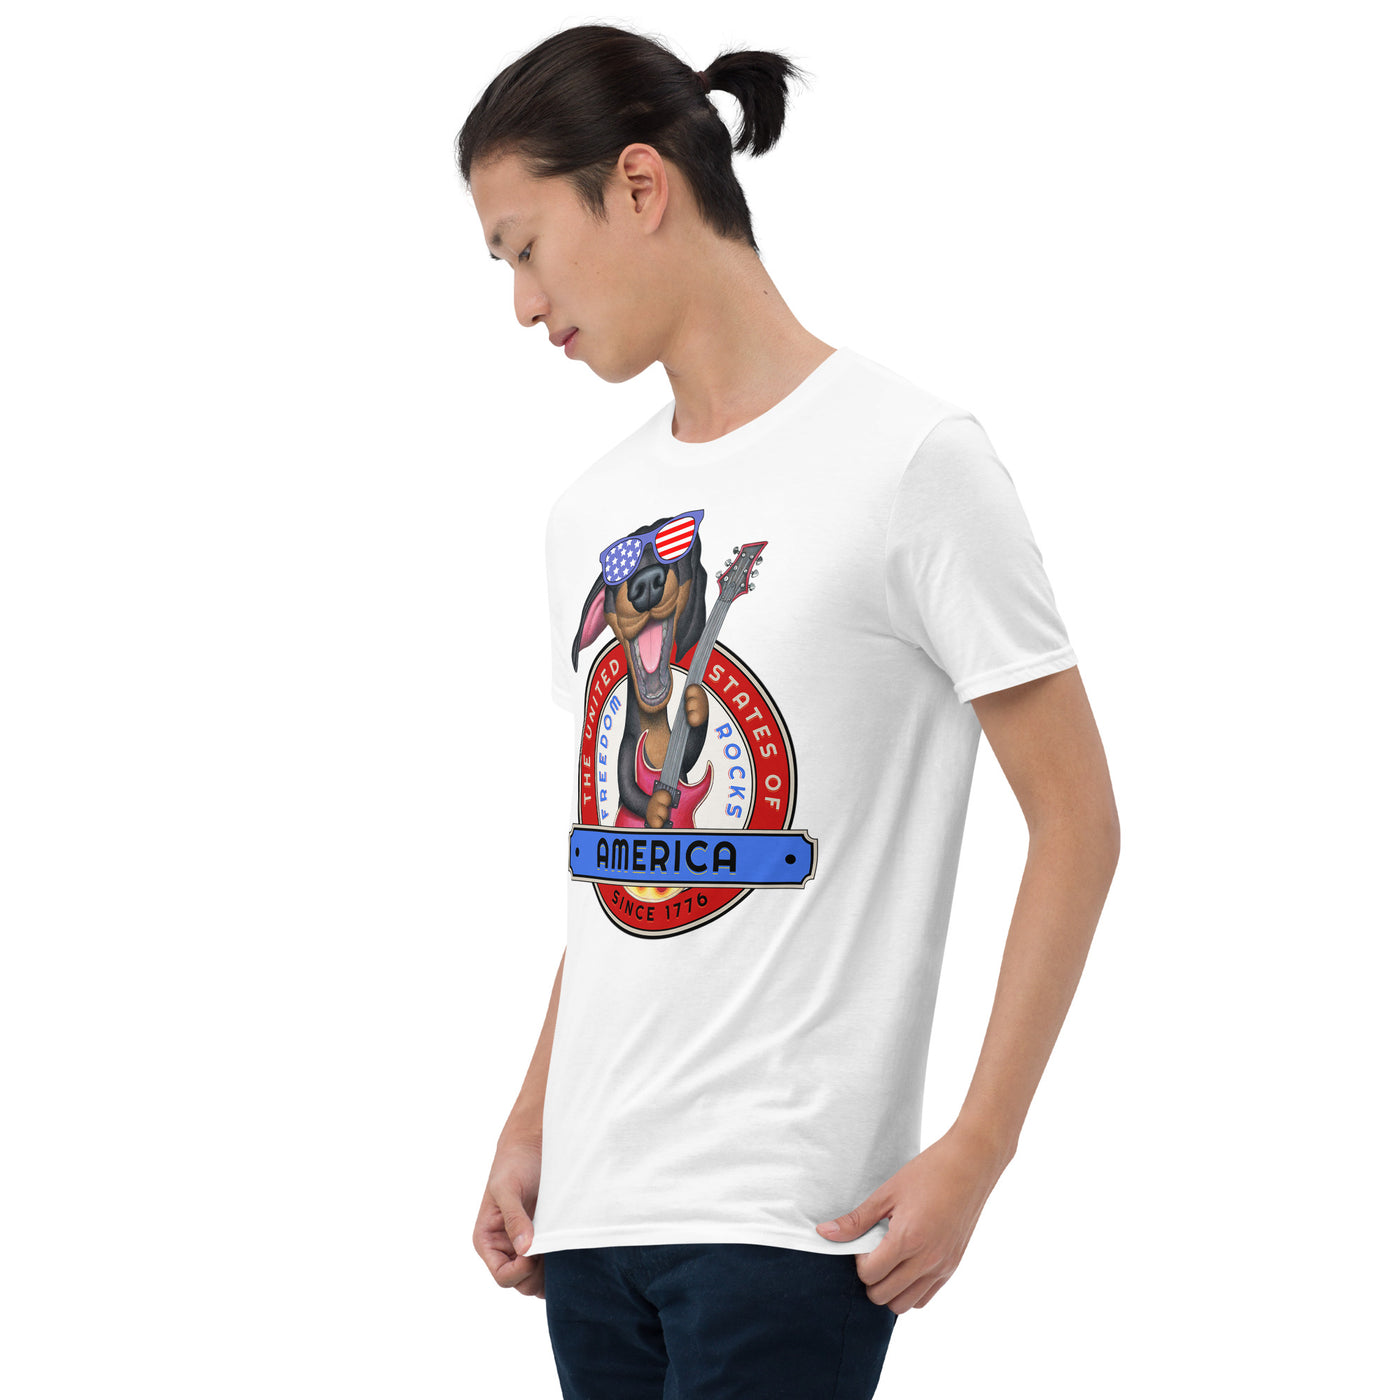 Funny Doxie dog with a guitar with red white and blue on a USA Freedom Unisex T-Shirt